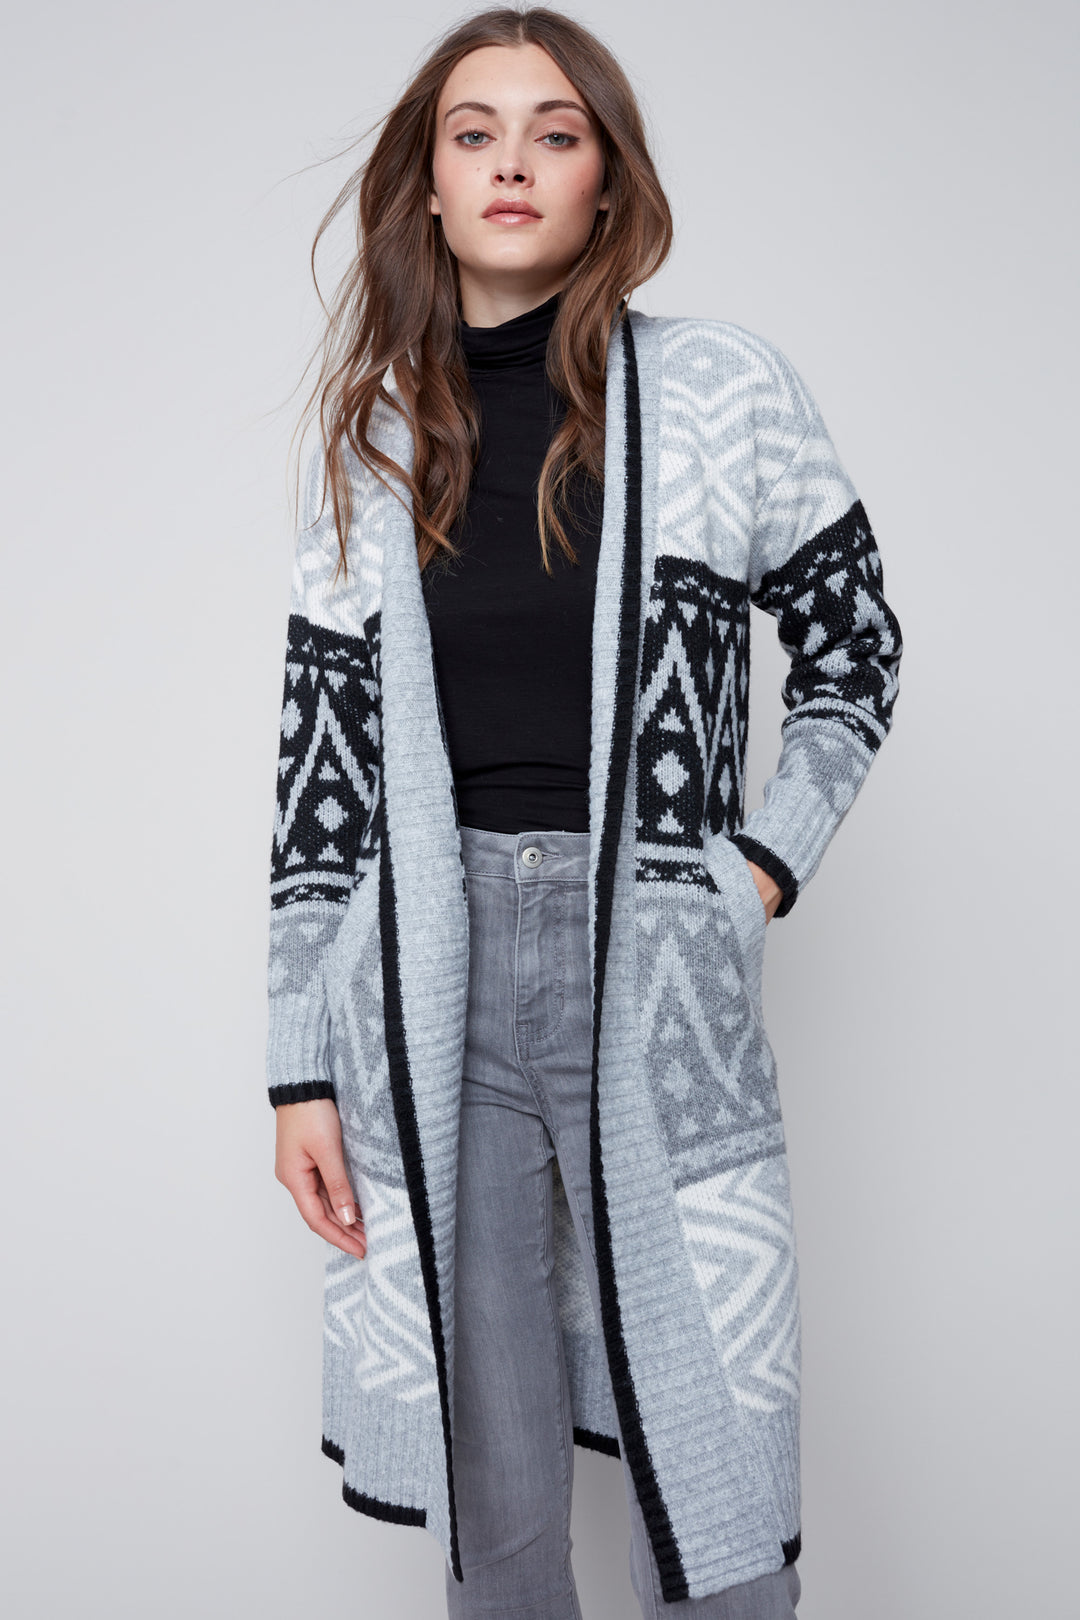 Its stunning aztec pattern says fall and winter, while its pockets make it as functional as it is fashionable.